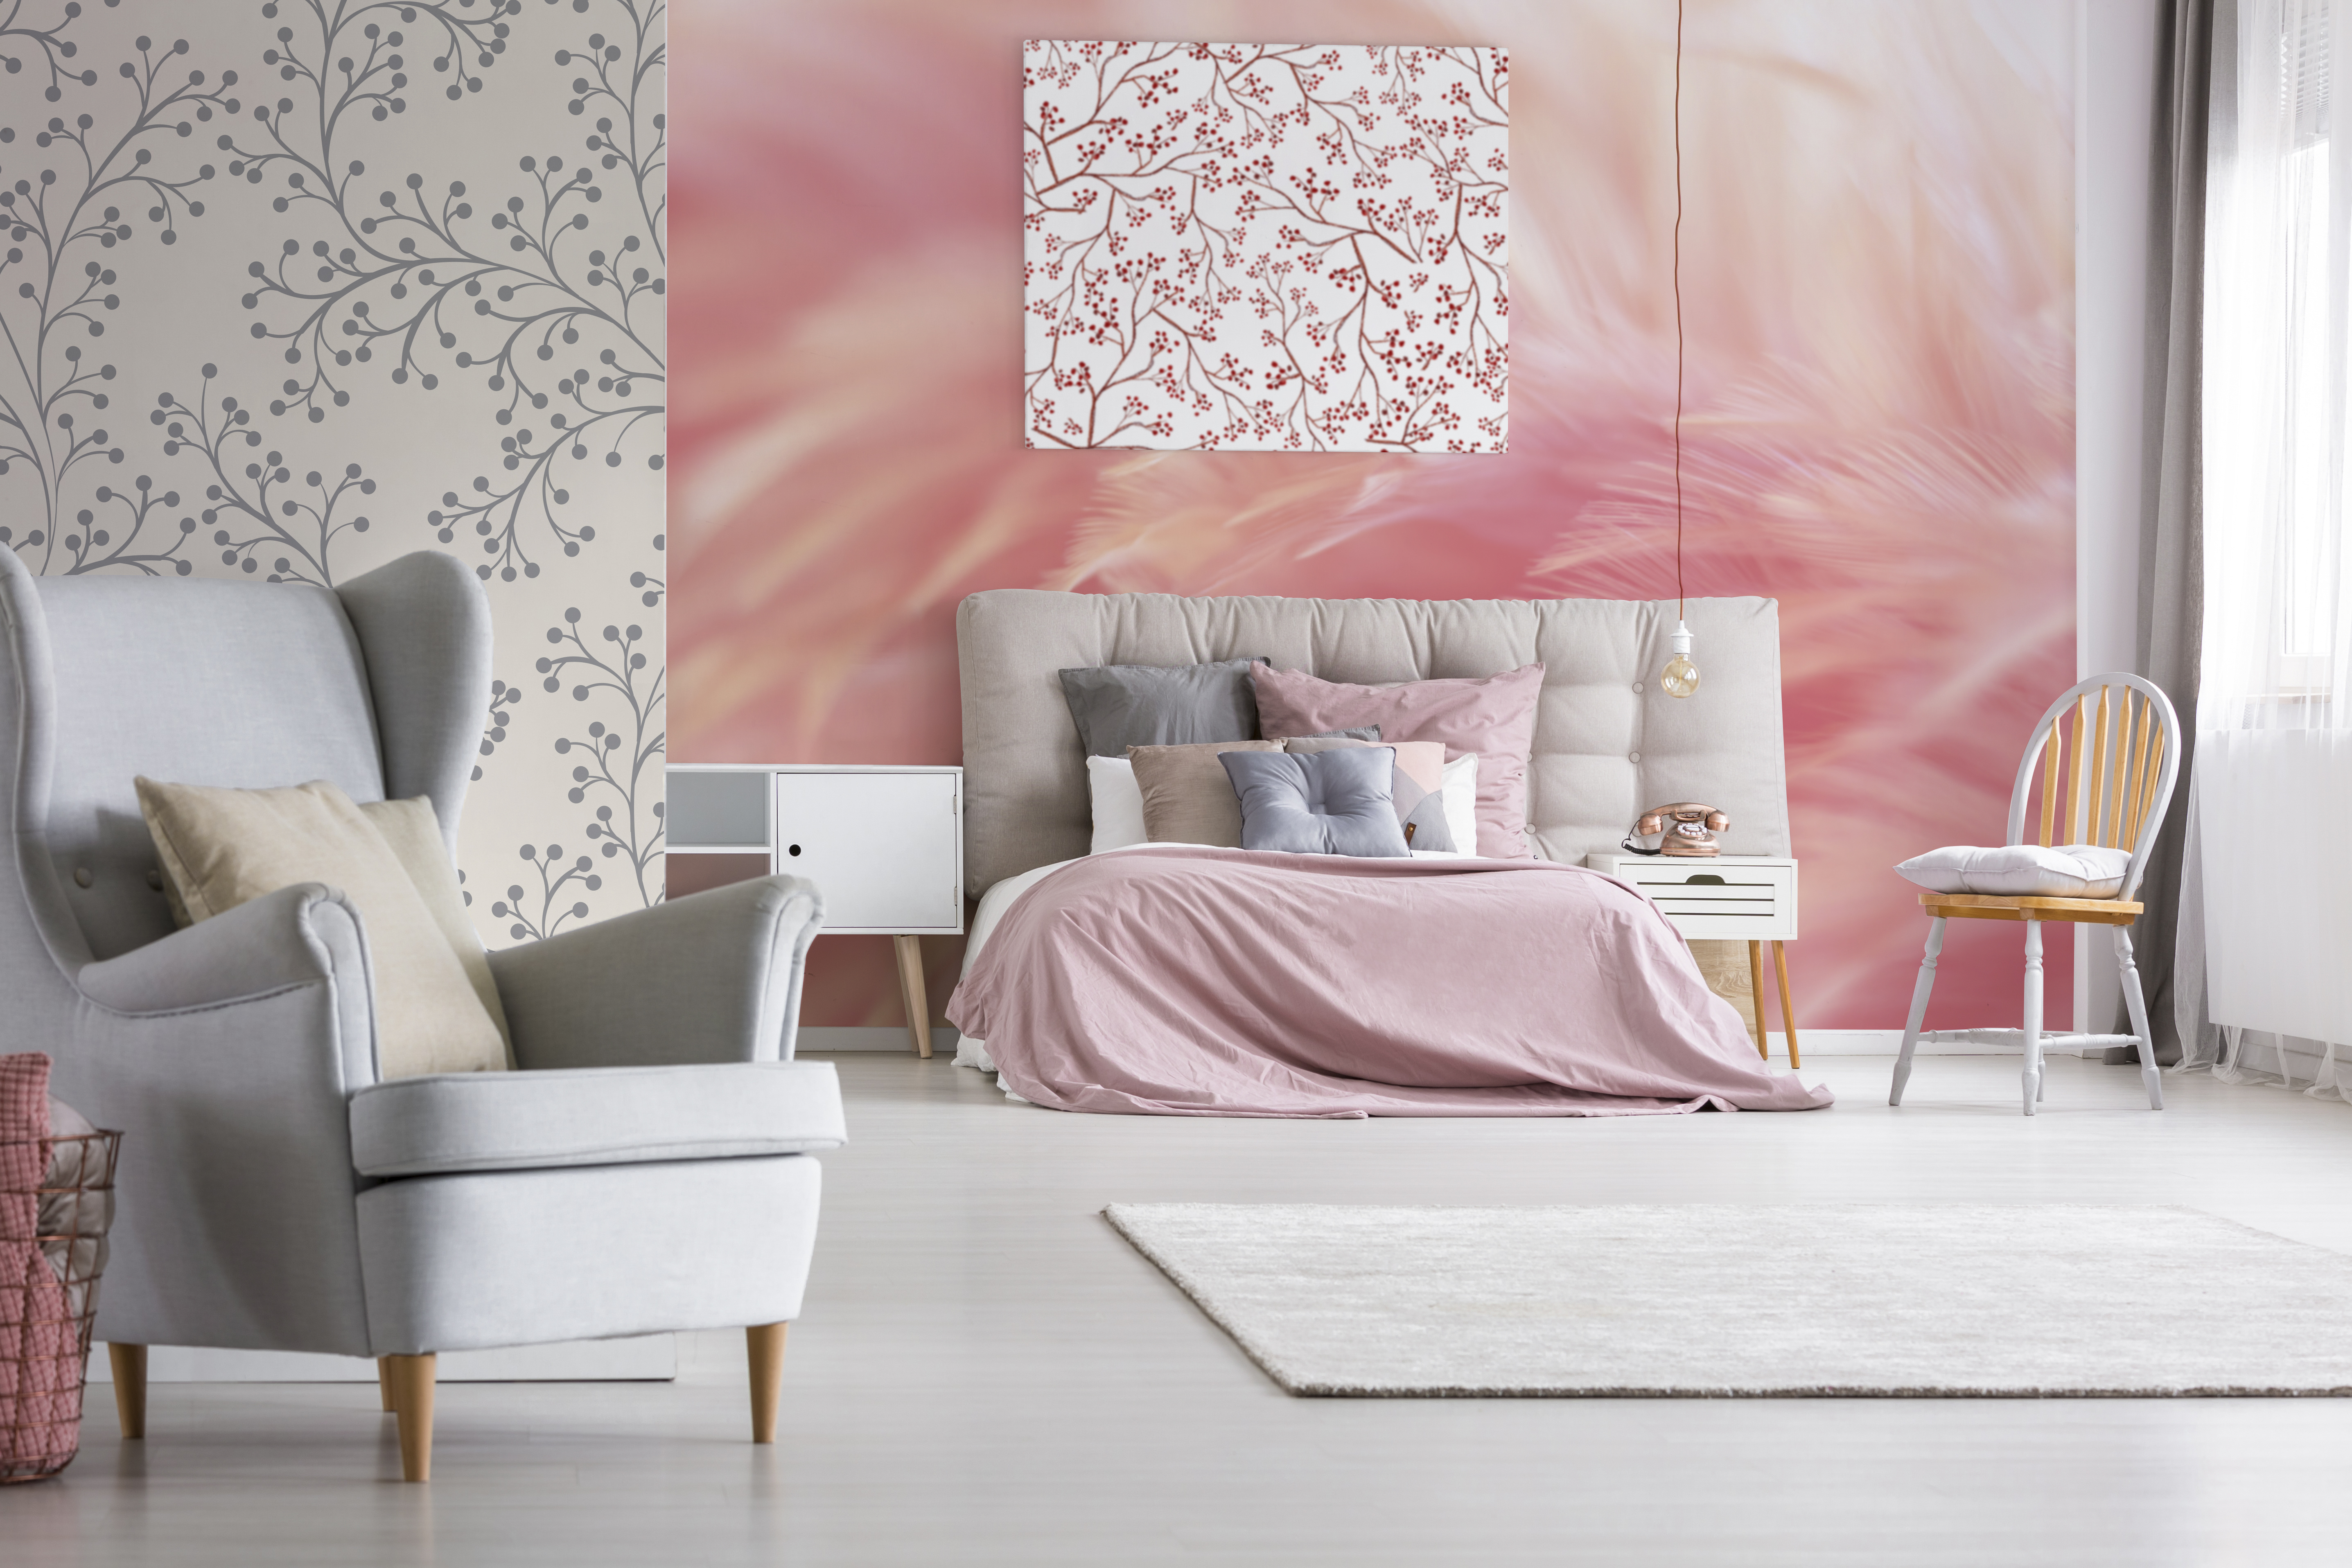 The 2019 color of the year in interiors – Furnishing International